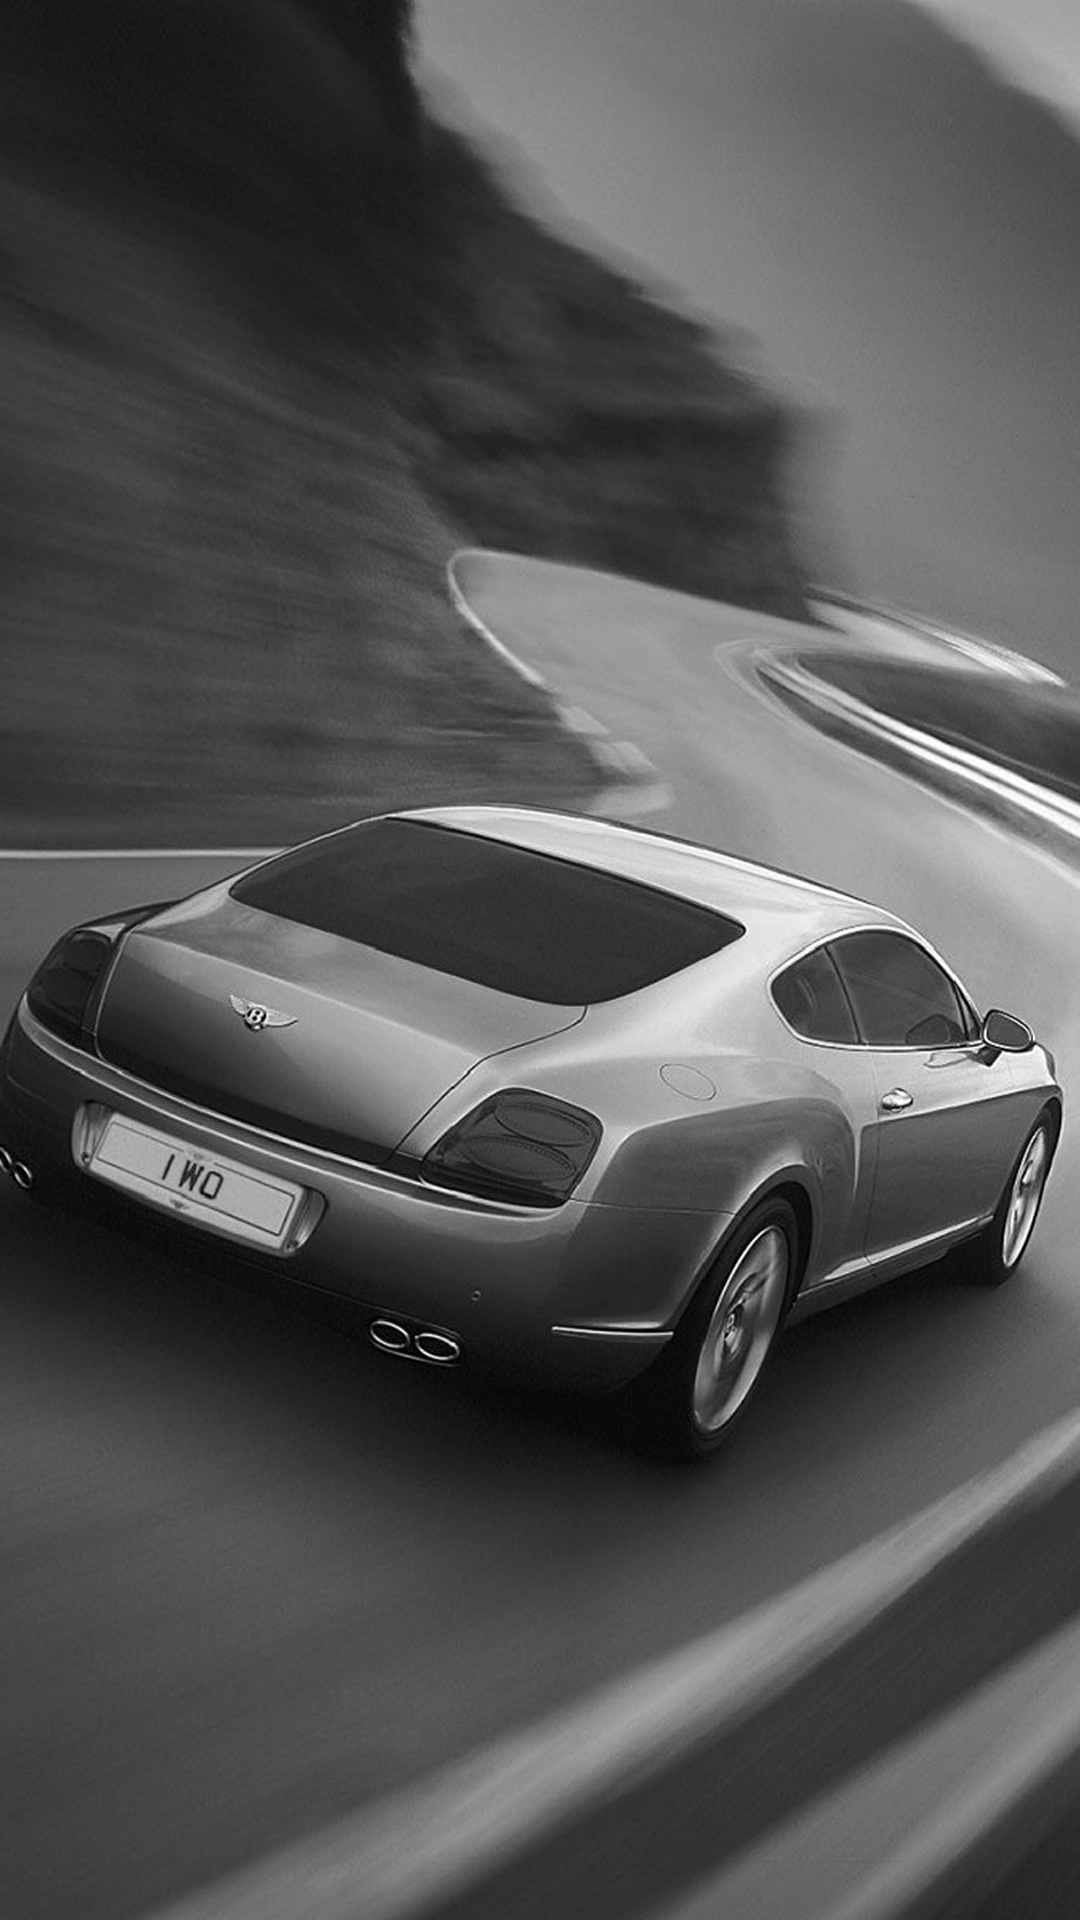 Free Download Bentley Continental Gt Black And White Android Wallpaper Download 1080x19 For Your Desktop Mobile Tablet Explore 73 White Android Wallpaper Android Wallpapers Hd Free Wallpaper For Android